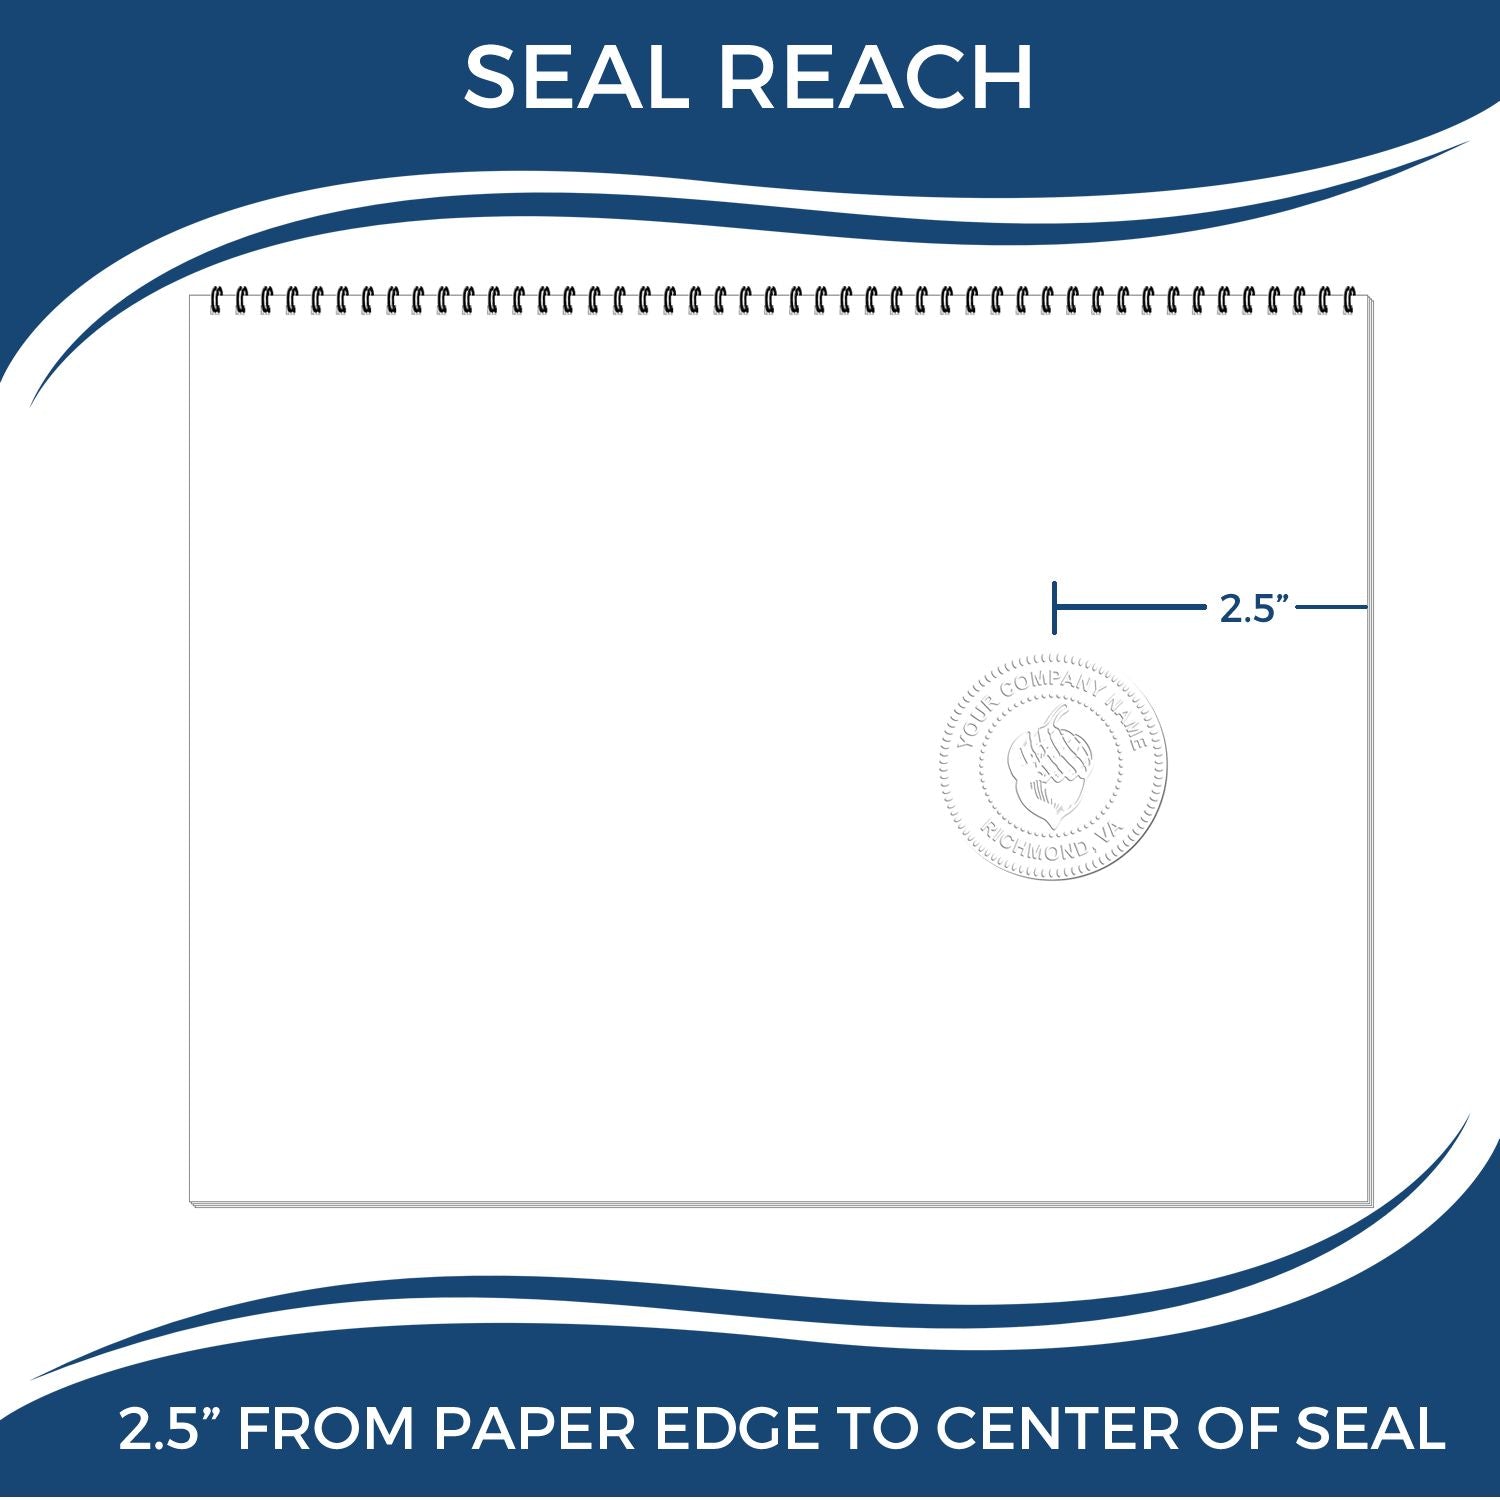 An infographic showing the seal reach which is represented by a ruler and a miniature seal image of the Heavy Duty Cast Iron Iowa Architect Embosser